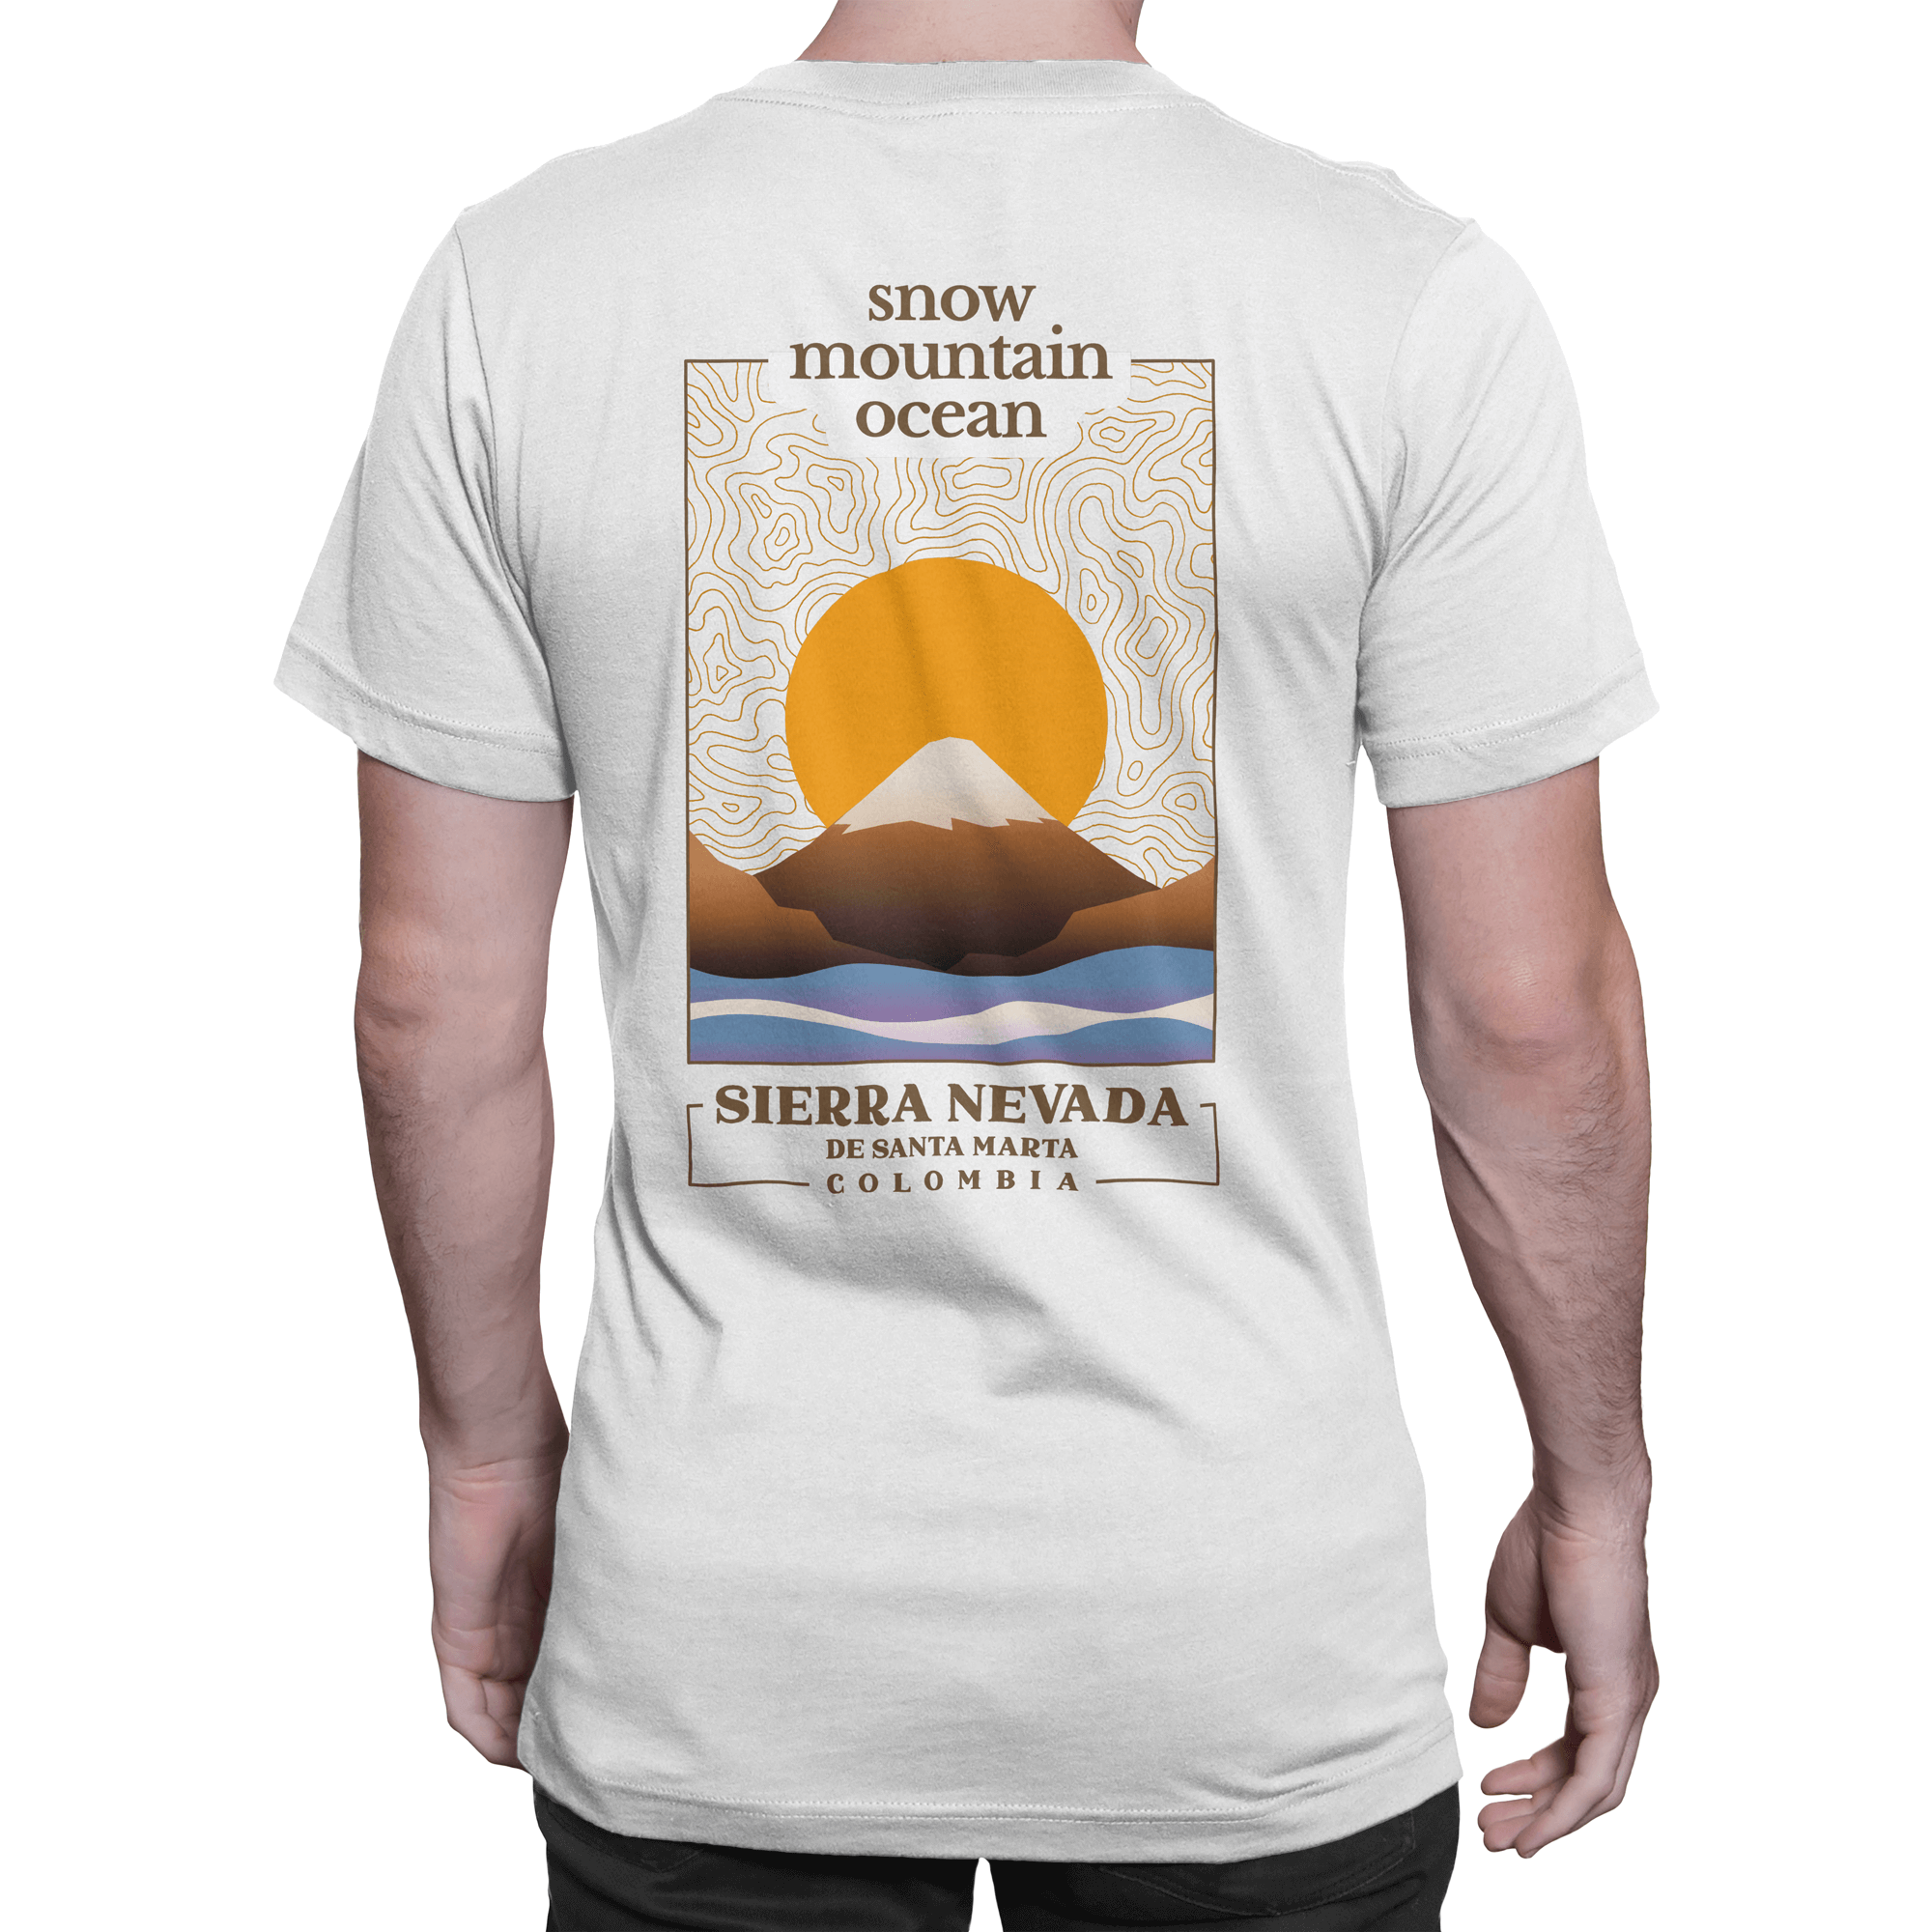 The Younger Brothers Premium T-Shirt, white, snow mountain ocean